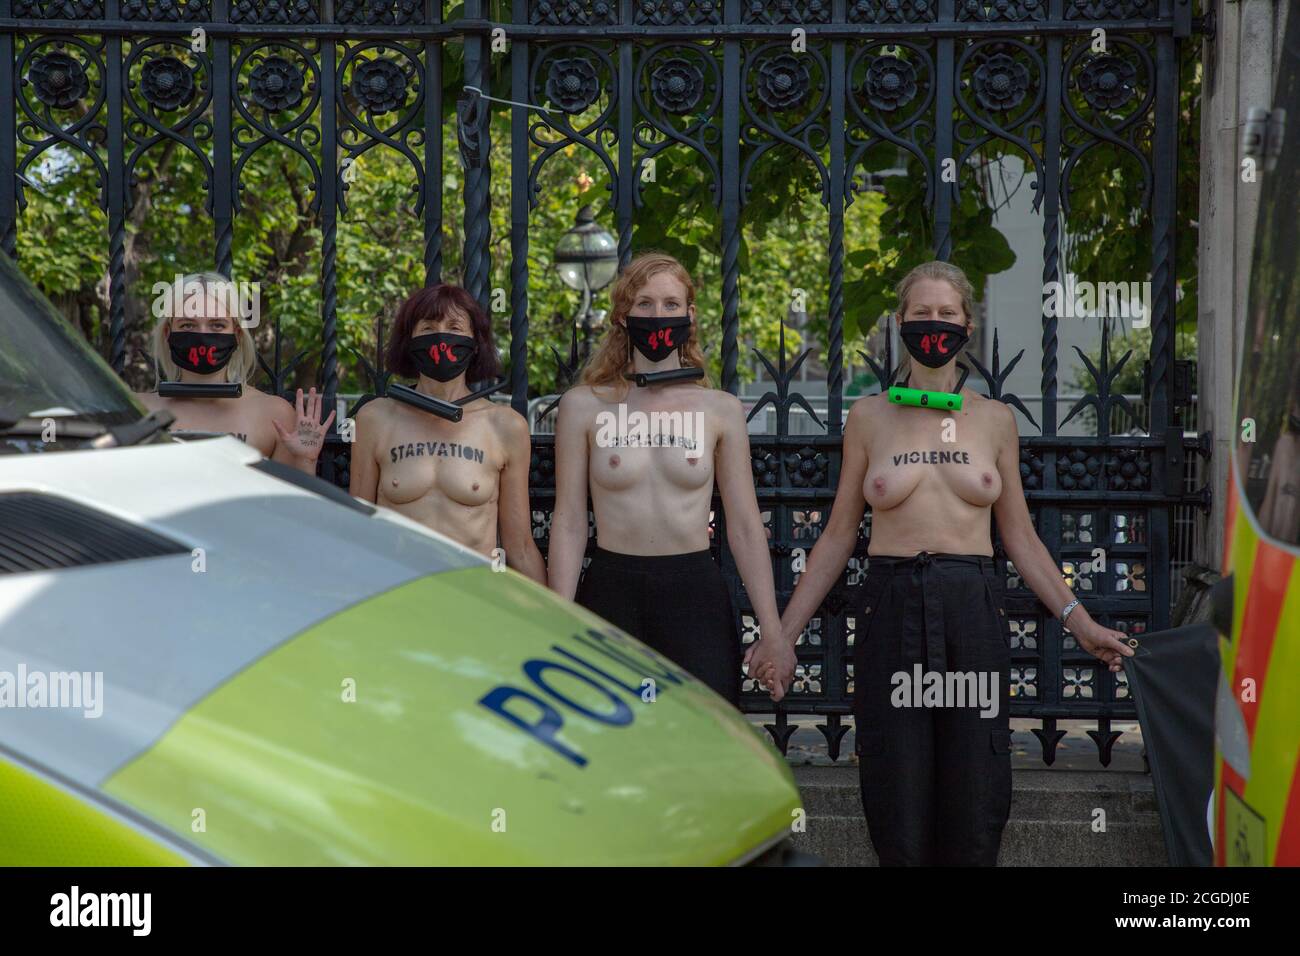 London, UK. 10th September 2020. Female members of Extinction Rebellion climate change action group seen chained to the railings of Westminster Palace. Credit: Joe Kuis / Alamy News Stock Photo